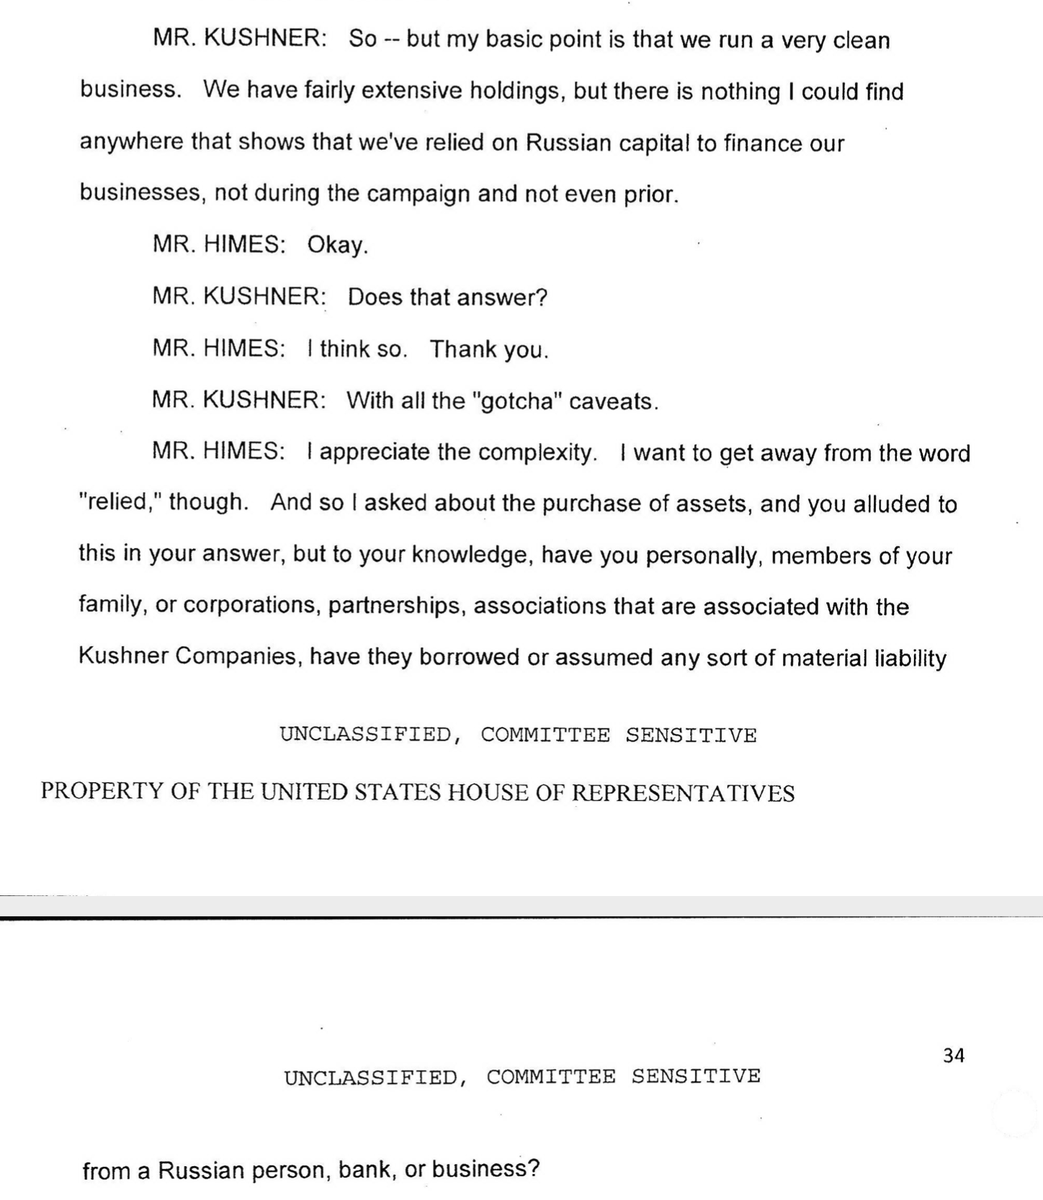 KUSH: My point is that we are *clean* Mob money laundering fronts and my attorneys tell me that I cannot remember where Eurasia is. HIMES: You are a dick.KUSH: So you get it? HIMES: Yes, you are an enormous treasony Mob asshole playing word games.